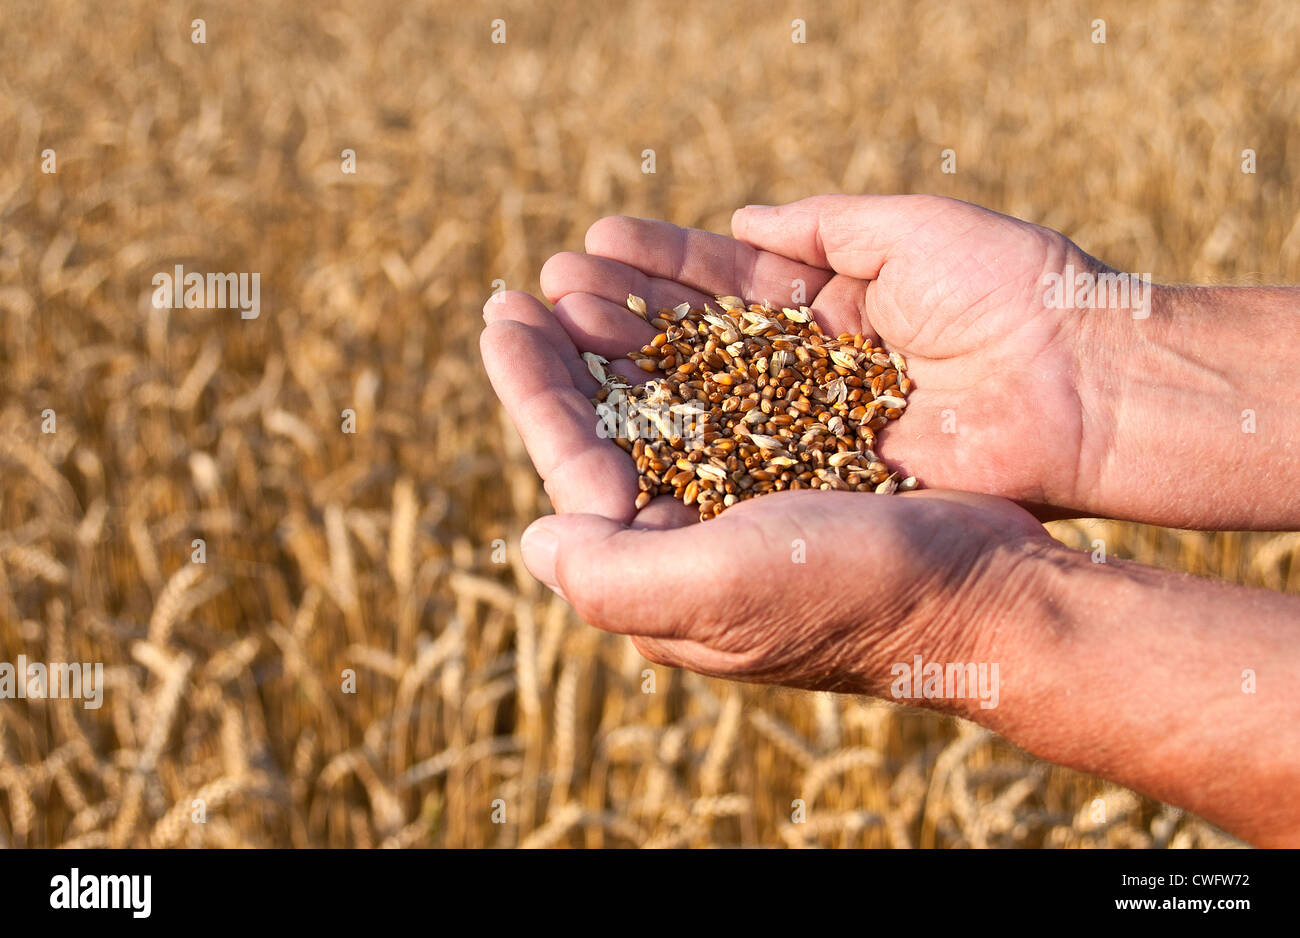 Man holding in his hands harvested wheat Stock Photo